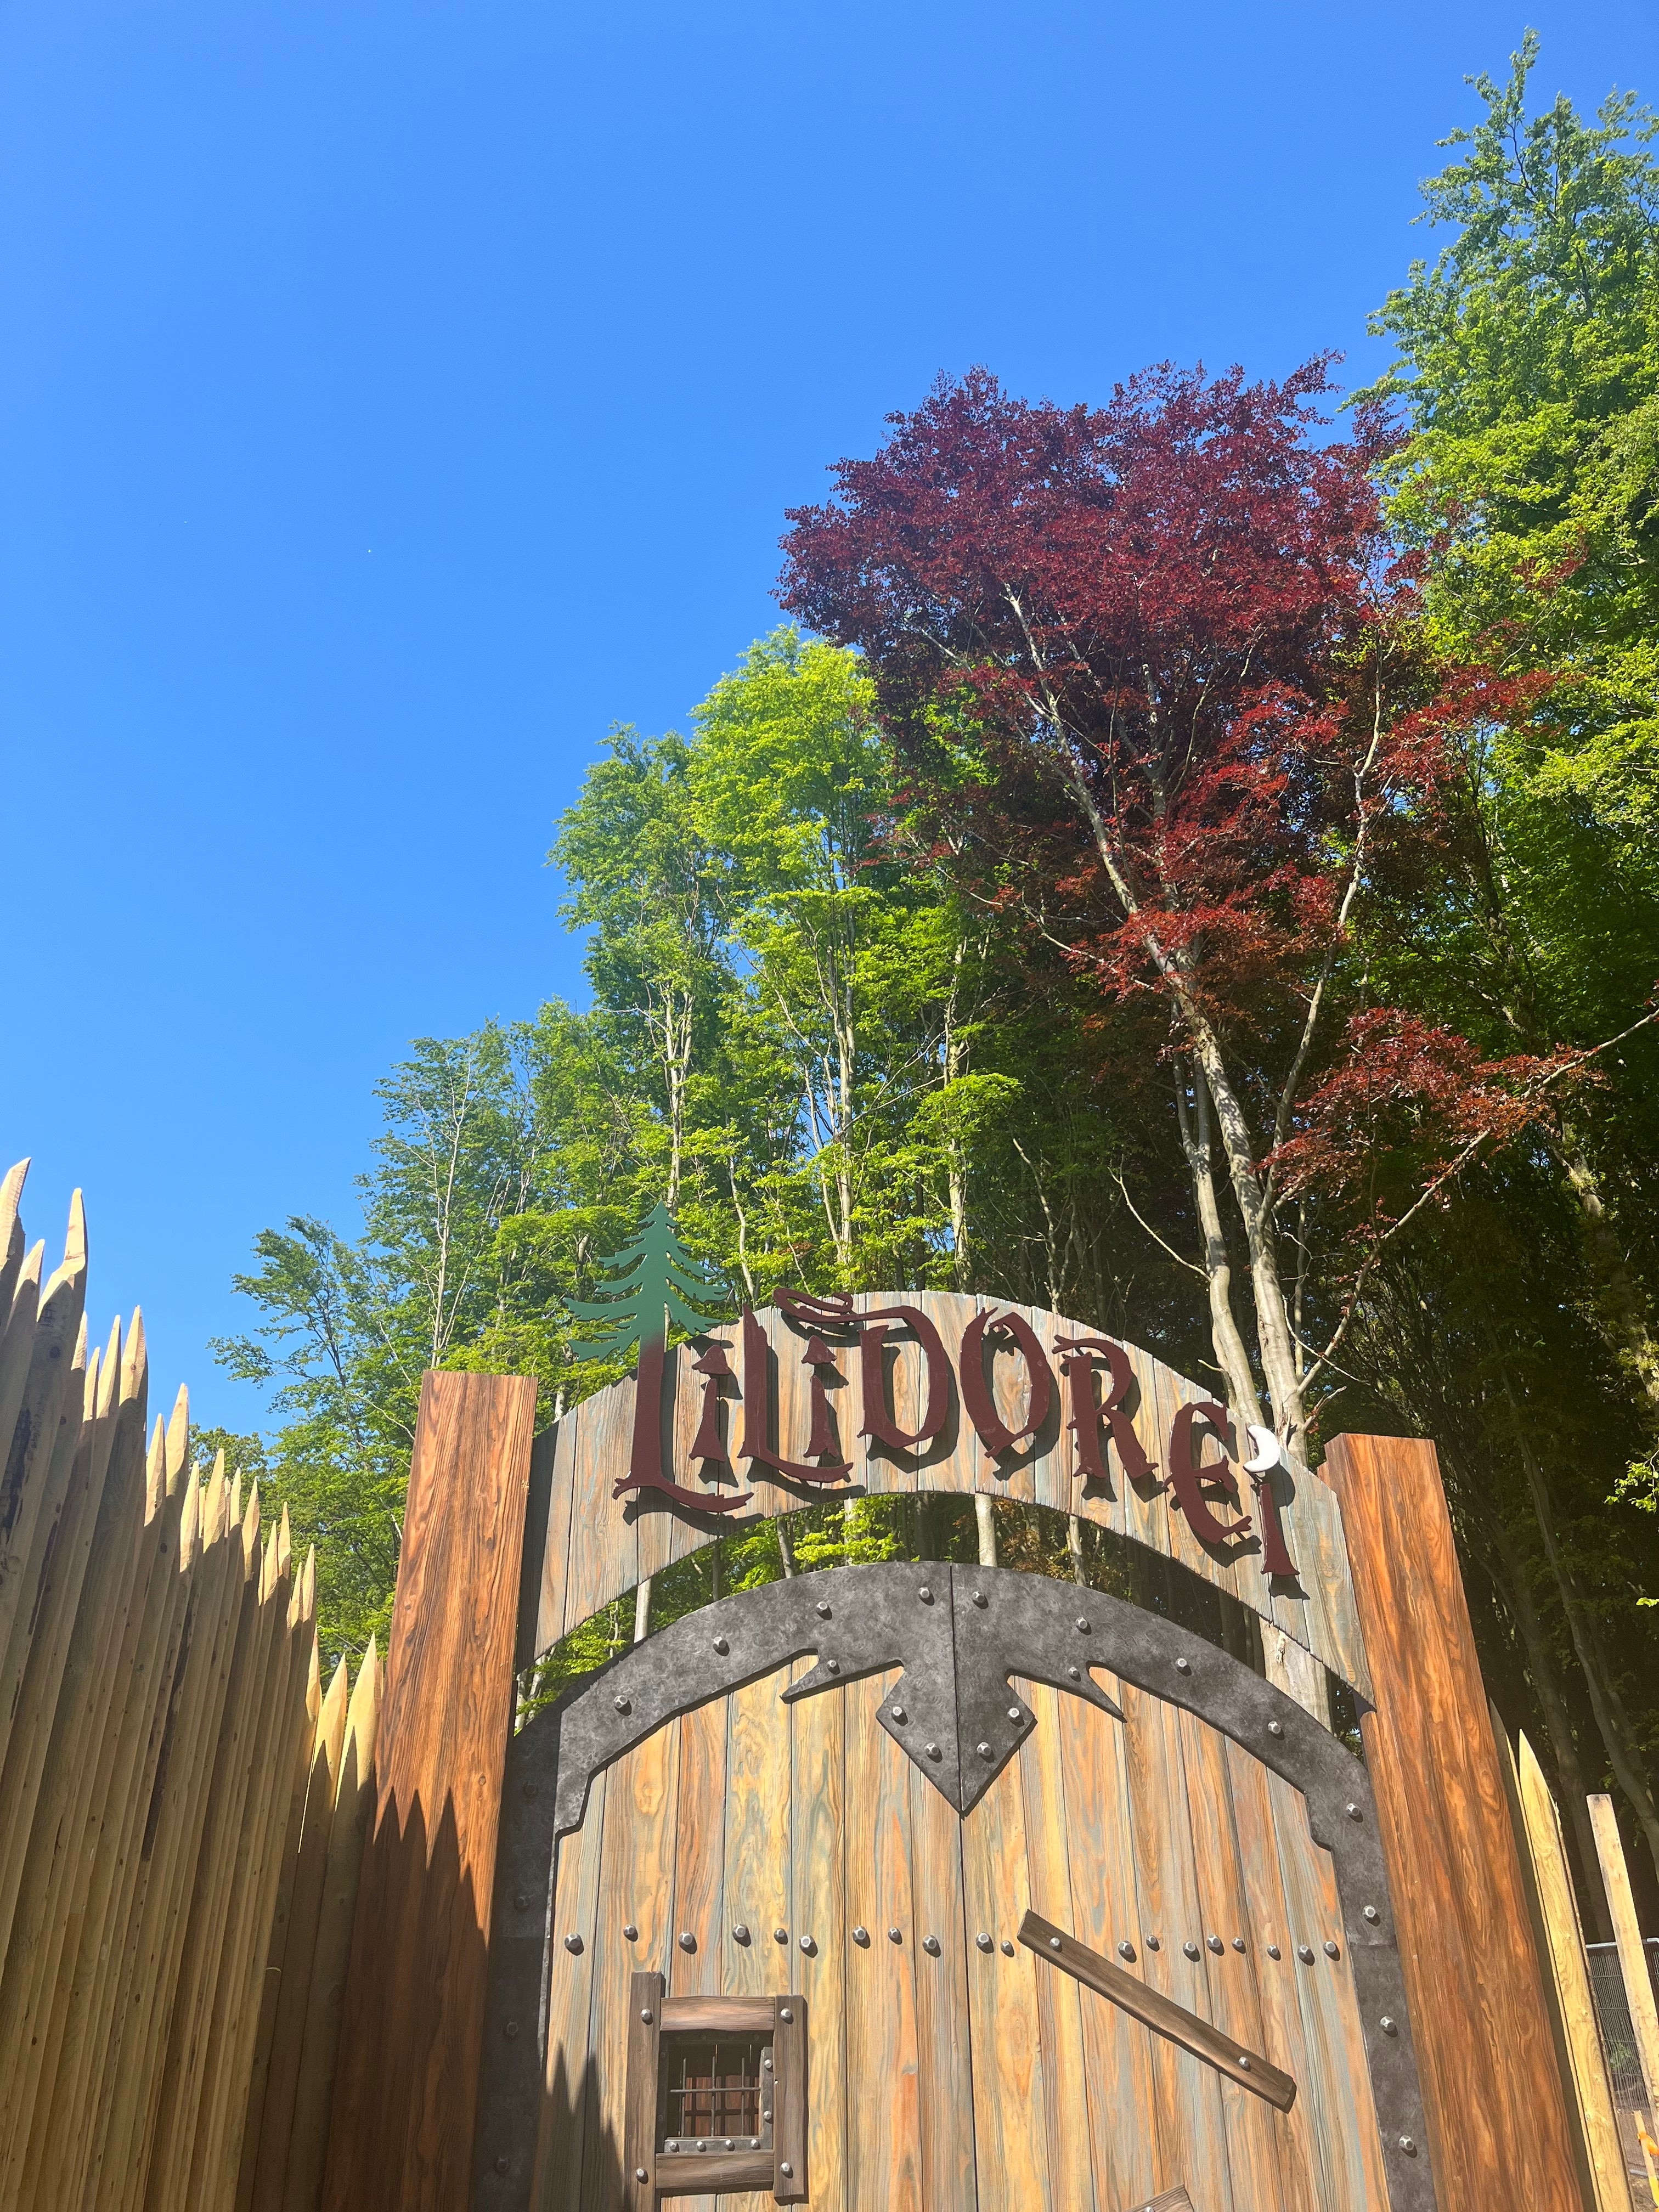 A medieval-style gate signals the start of the play village at Lilidorei